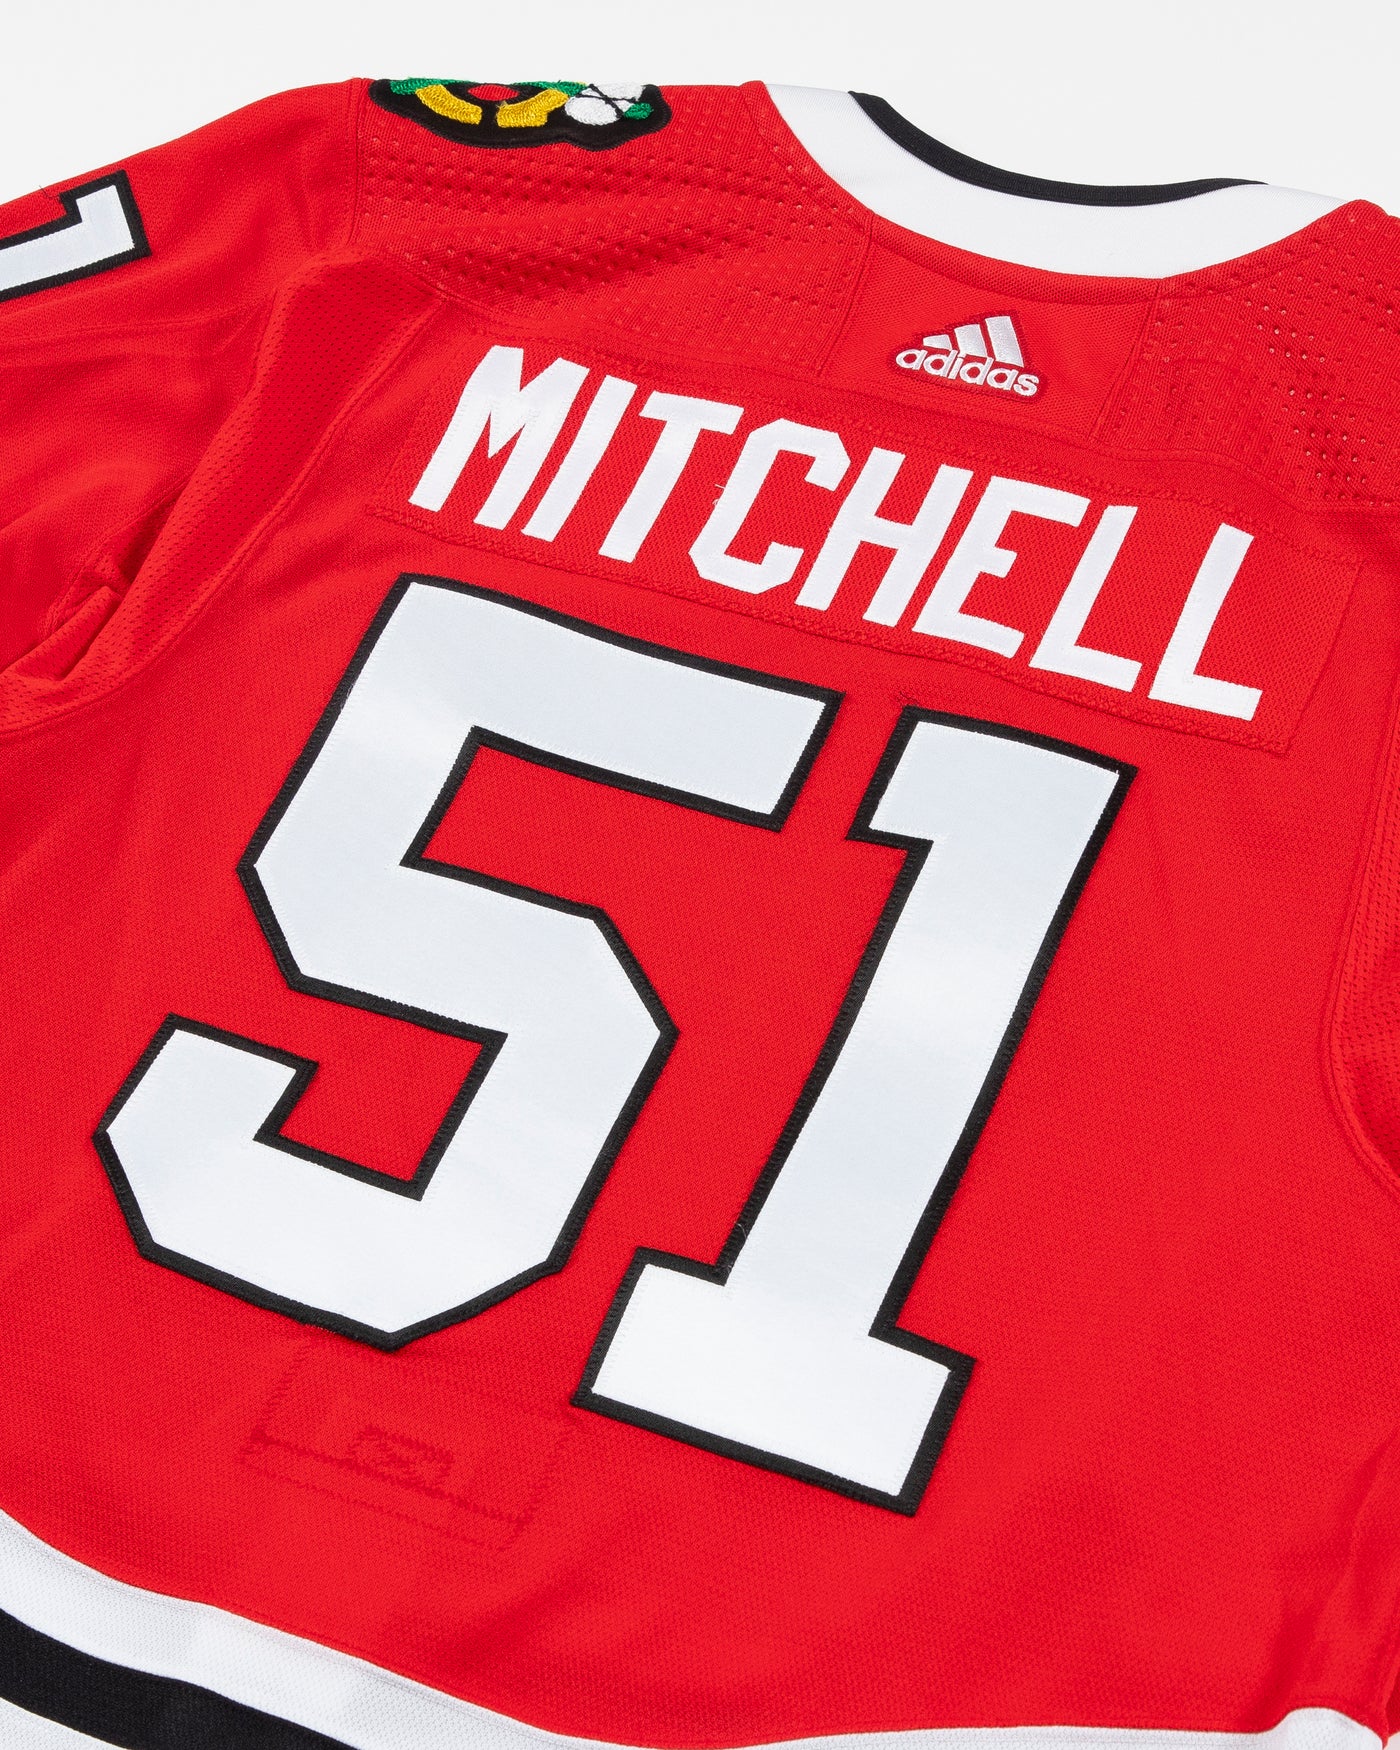 Autographed Chicago Blackhawks Ian Mitchell team issued red jersey - back close up